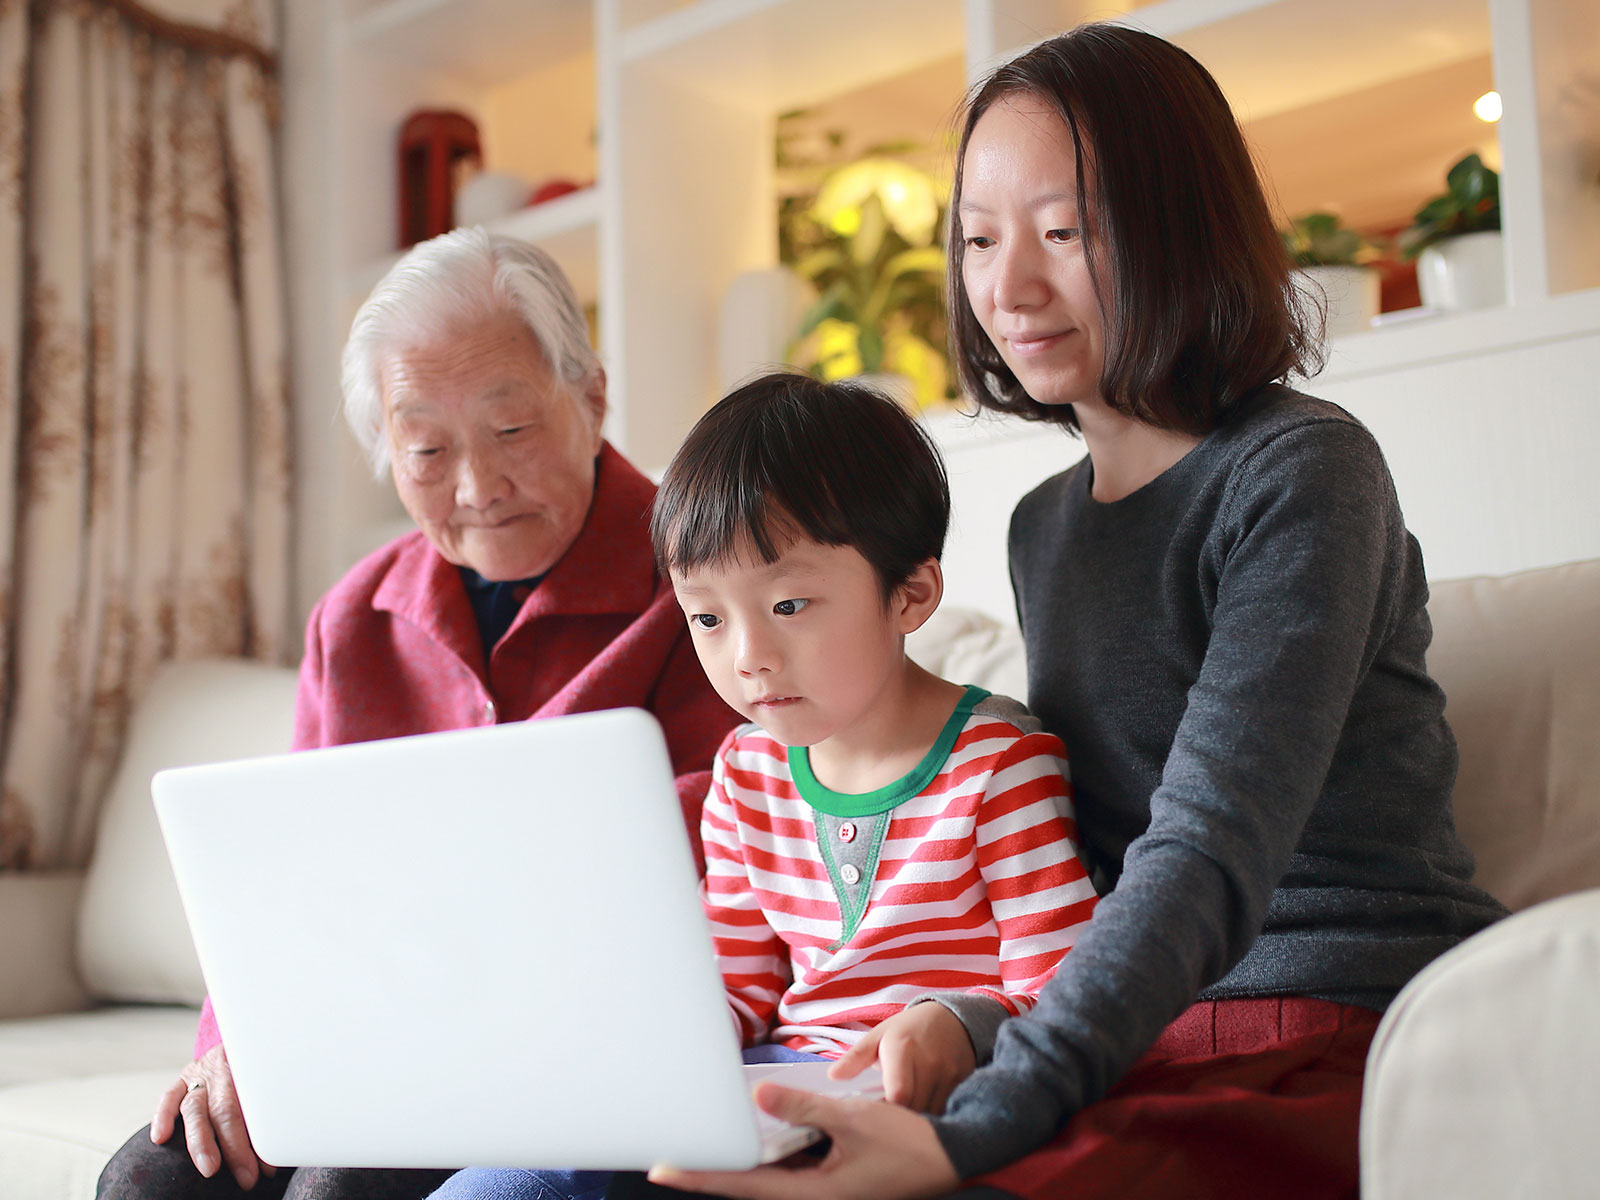 A woman and child work on a laptop while a grandparent looks on.